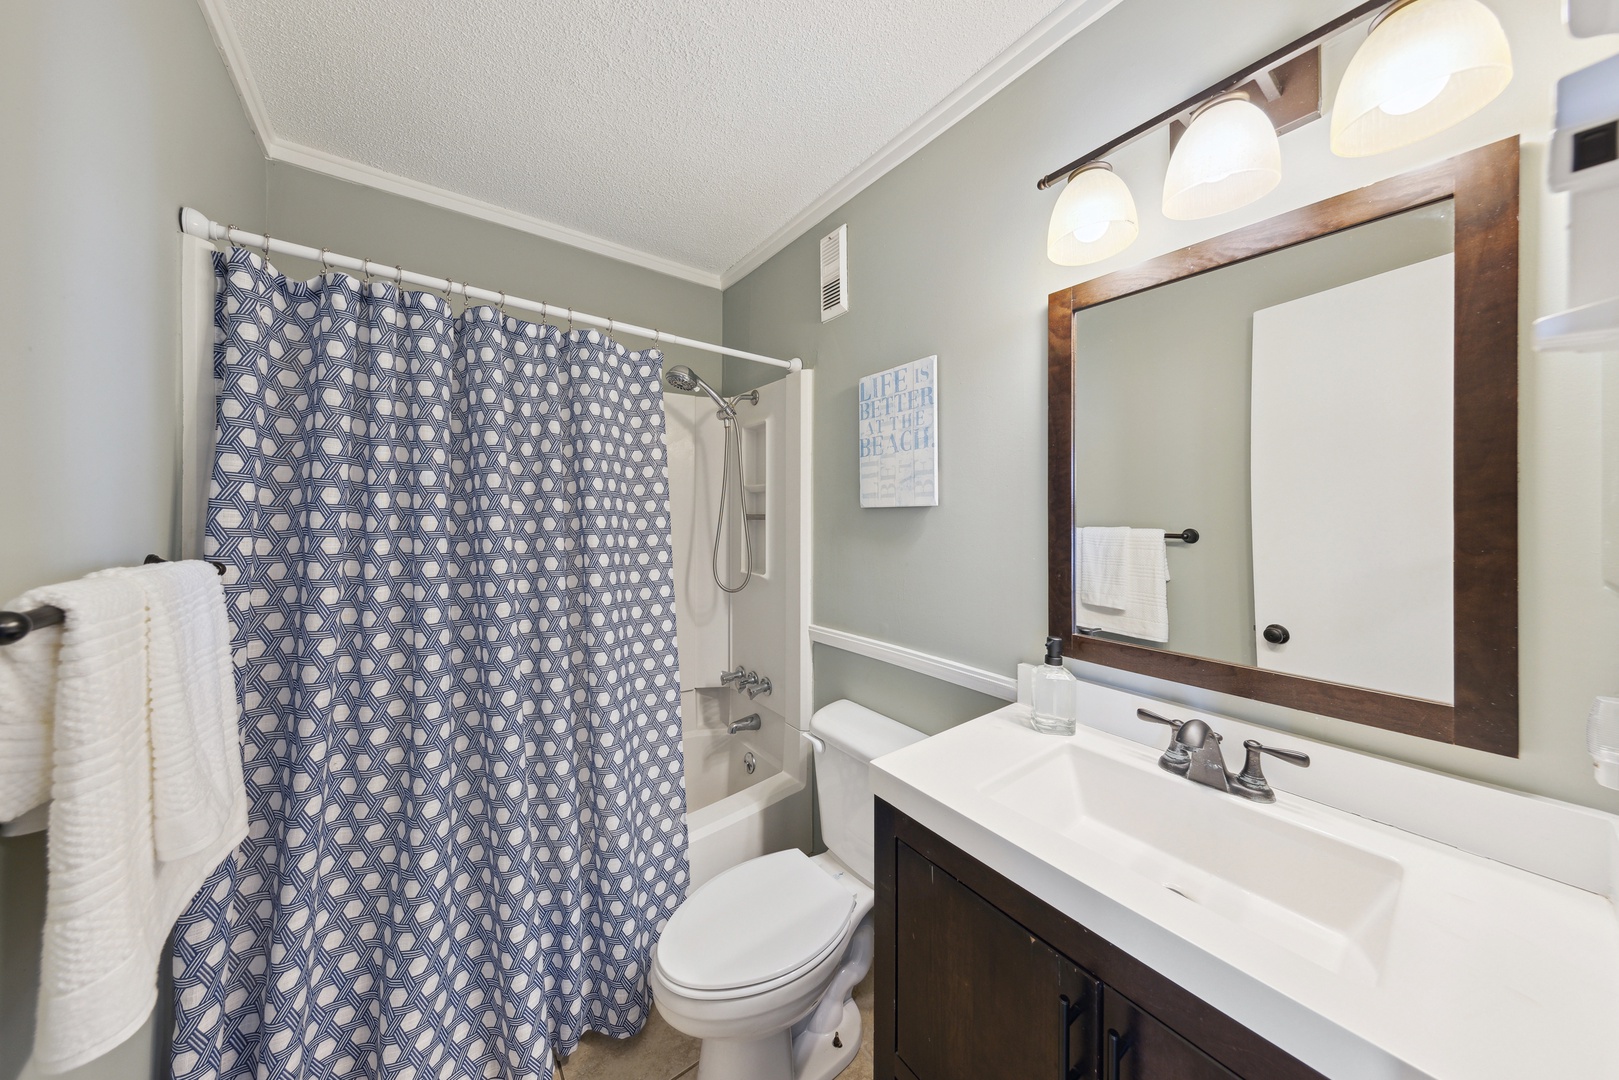 A second full bathroom offers a single vanity & shower/tub combo